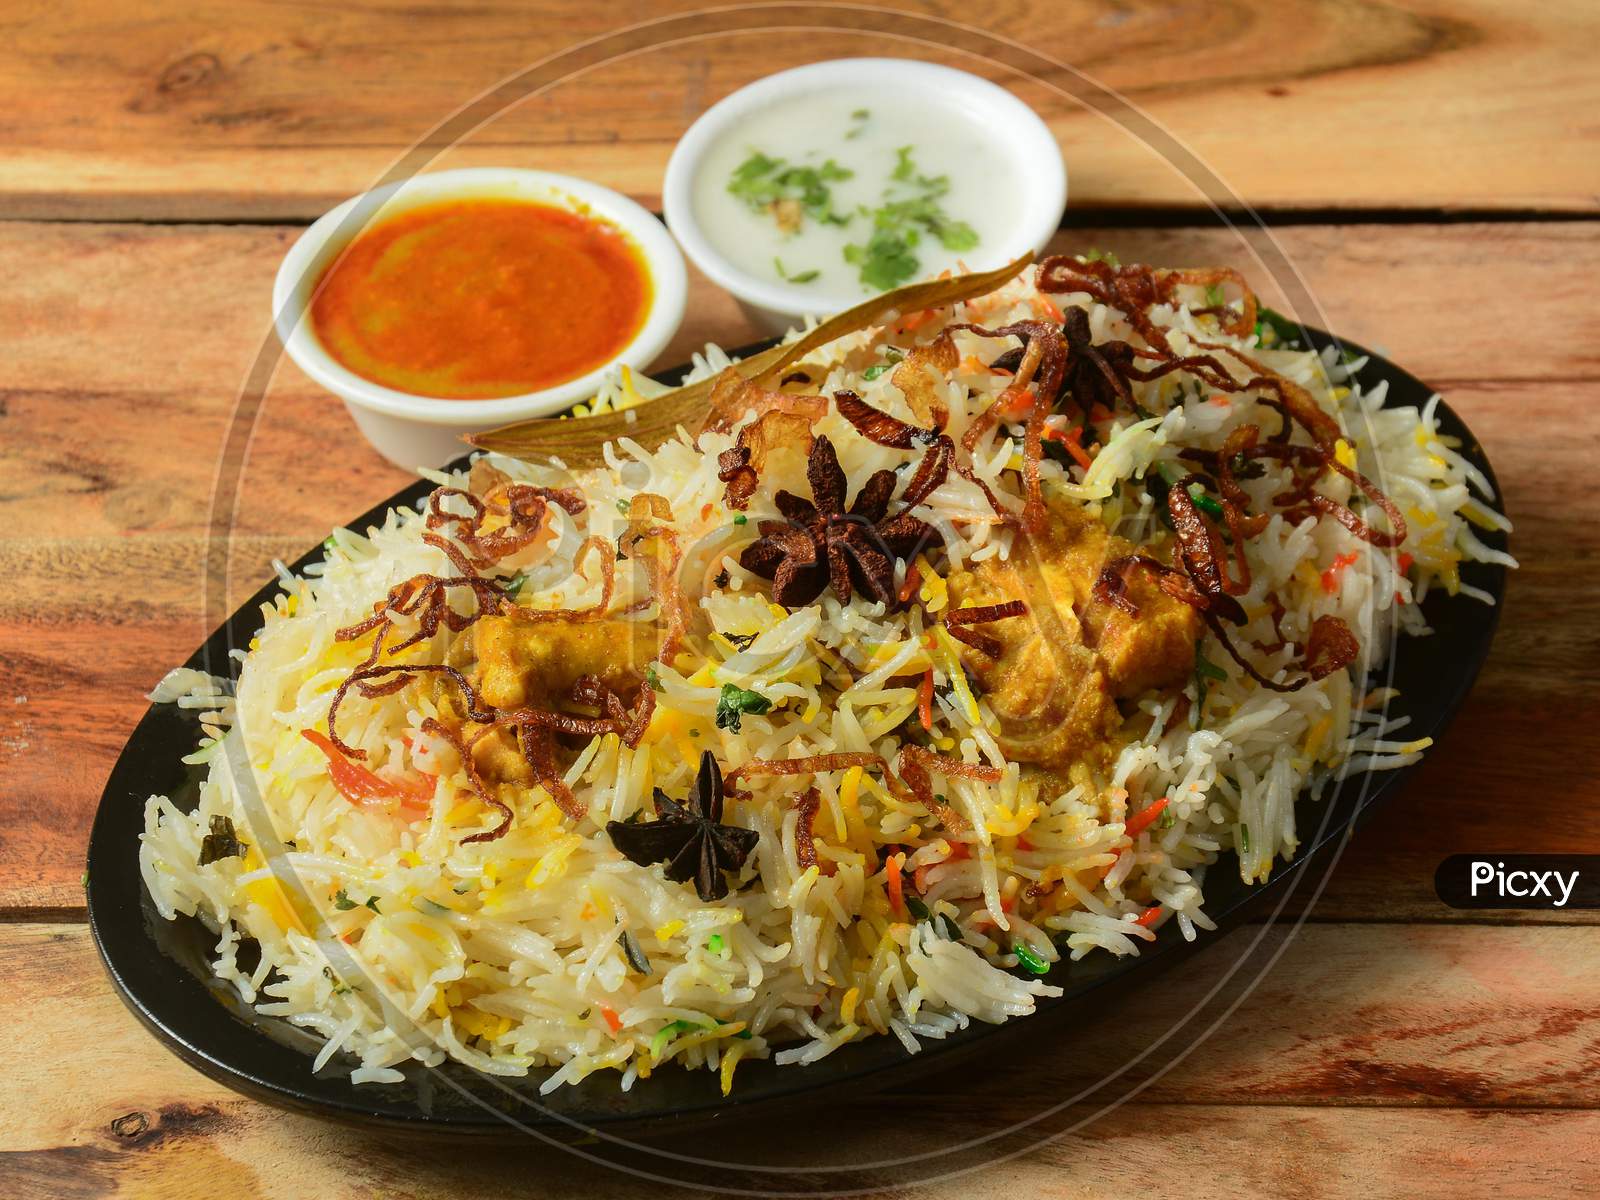 Traditional Hyderabadi Chicken Dum Biryani Made Of Basmati Rice Cooked With Masala Spices, Served With Onion Raita And Salan, Selective Focus